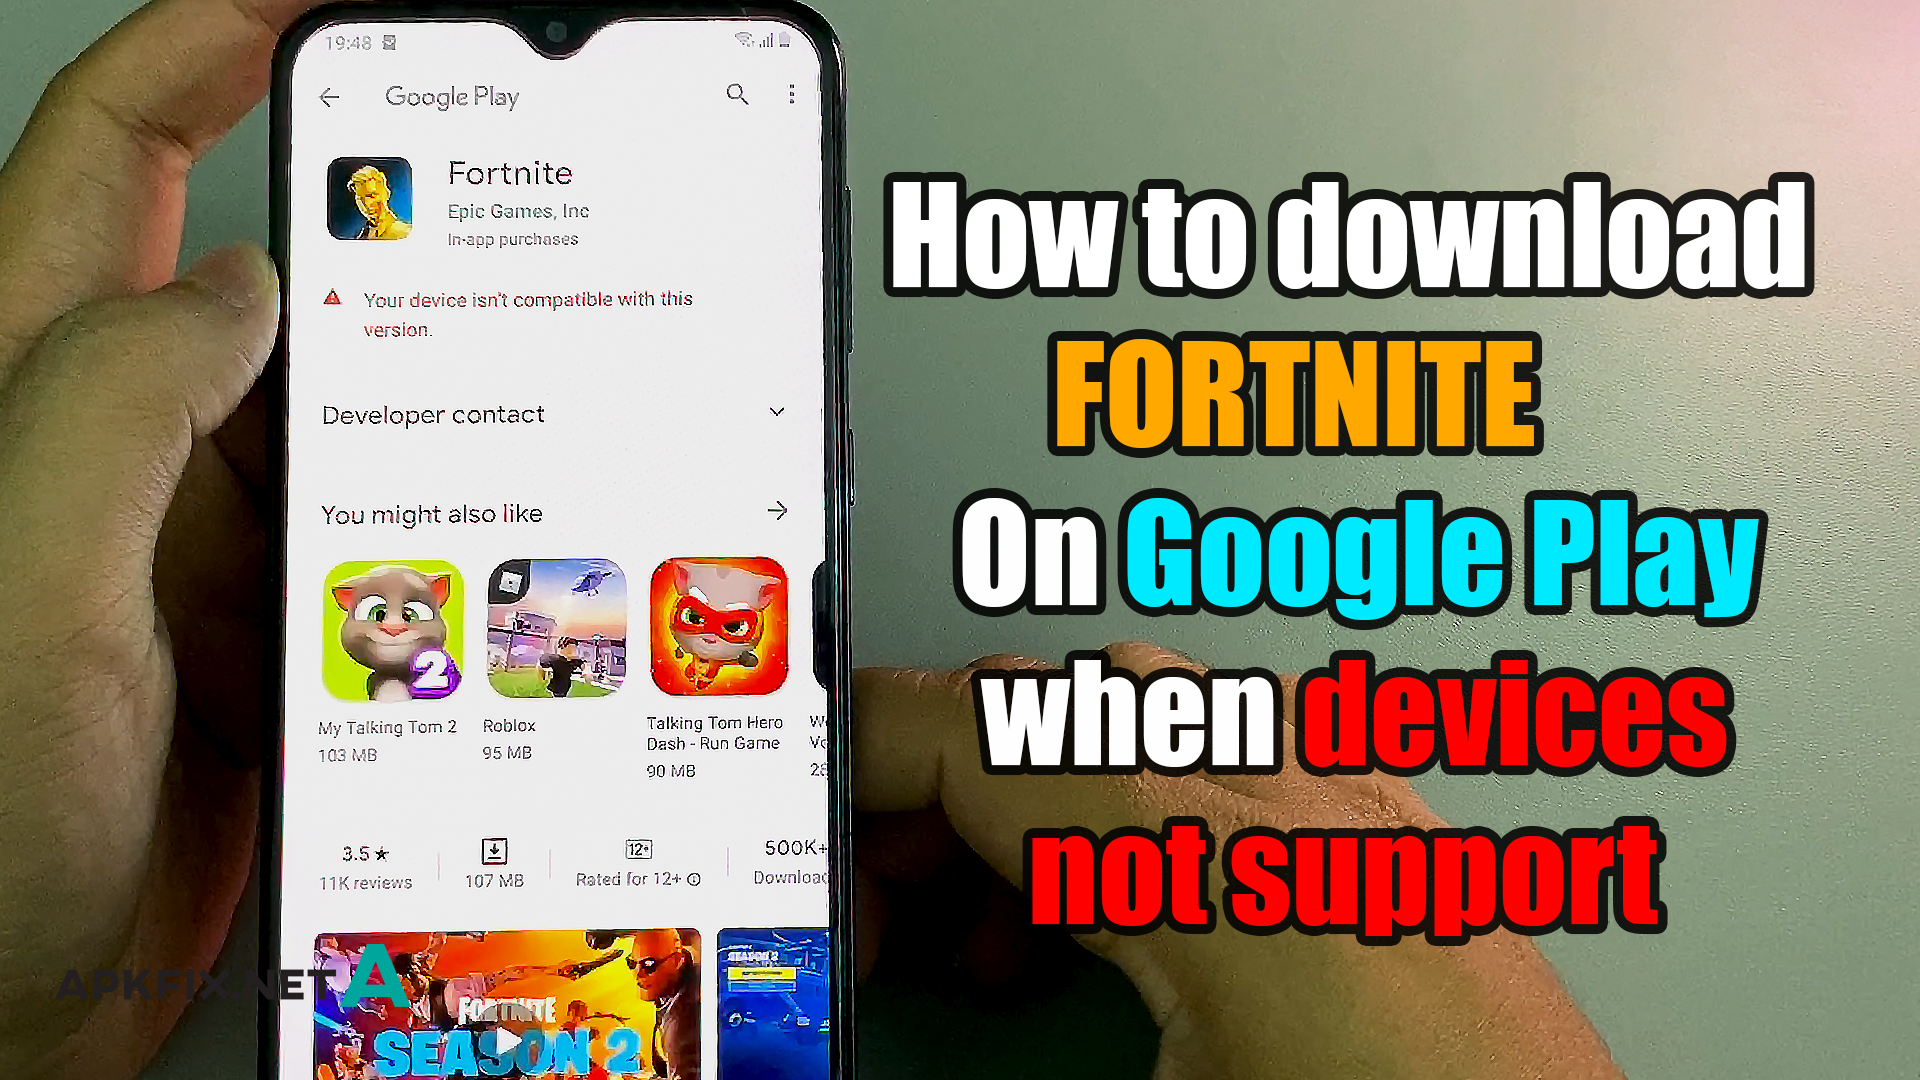 Device Not Supported Fortnite April 2019 How To Download Fortnite On Google Play When Device Not Support Apk Fix